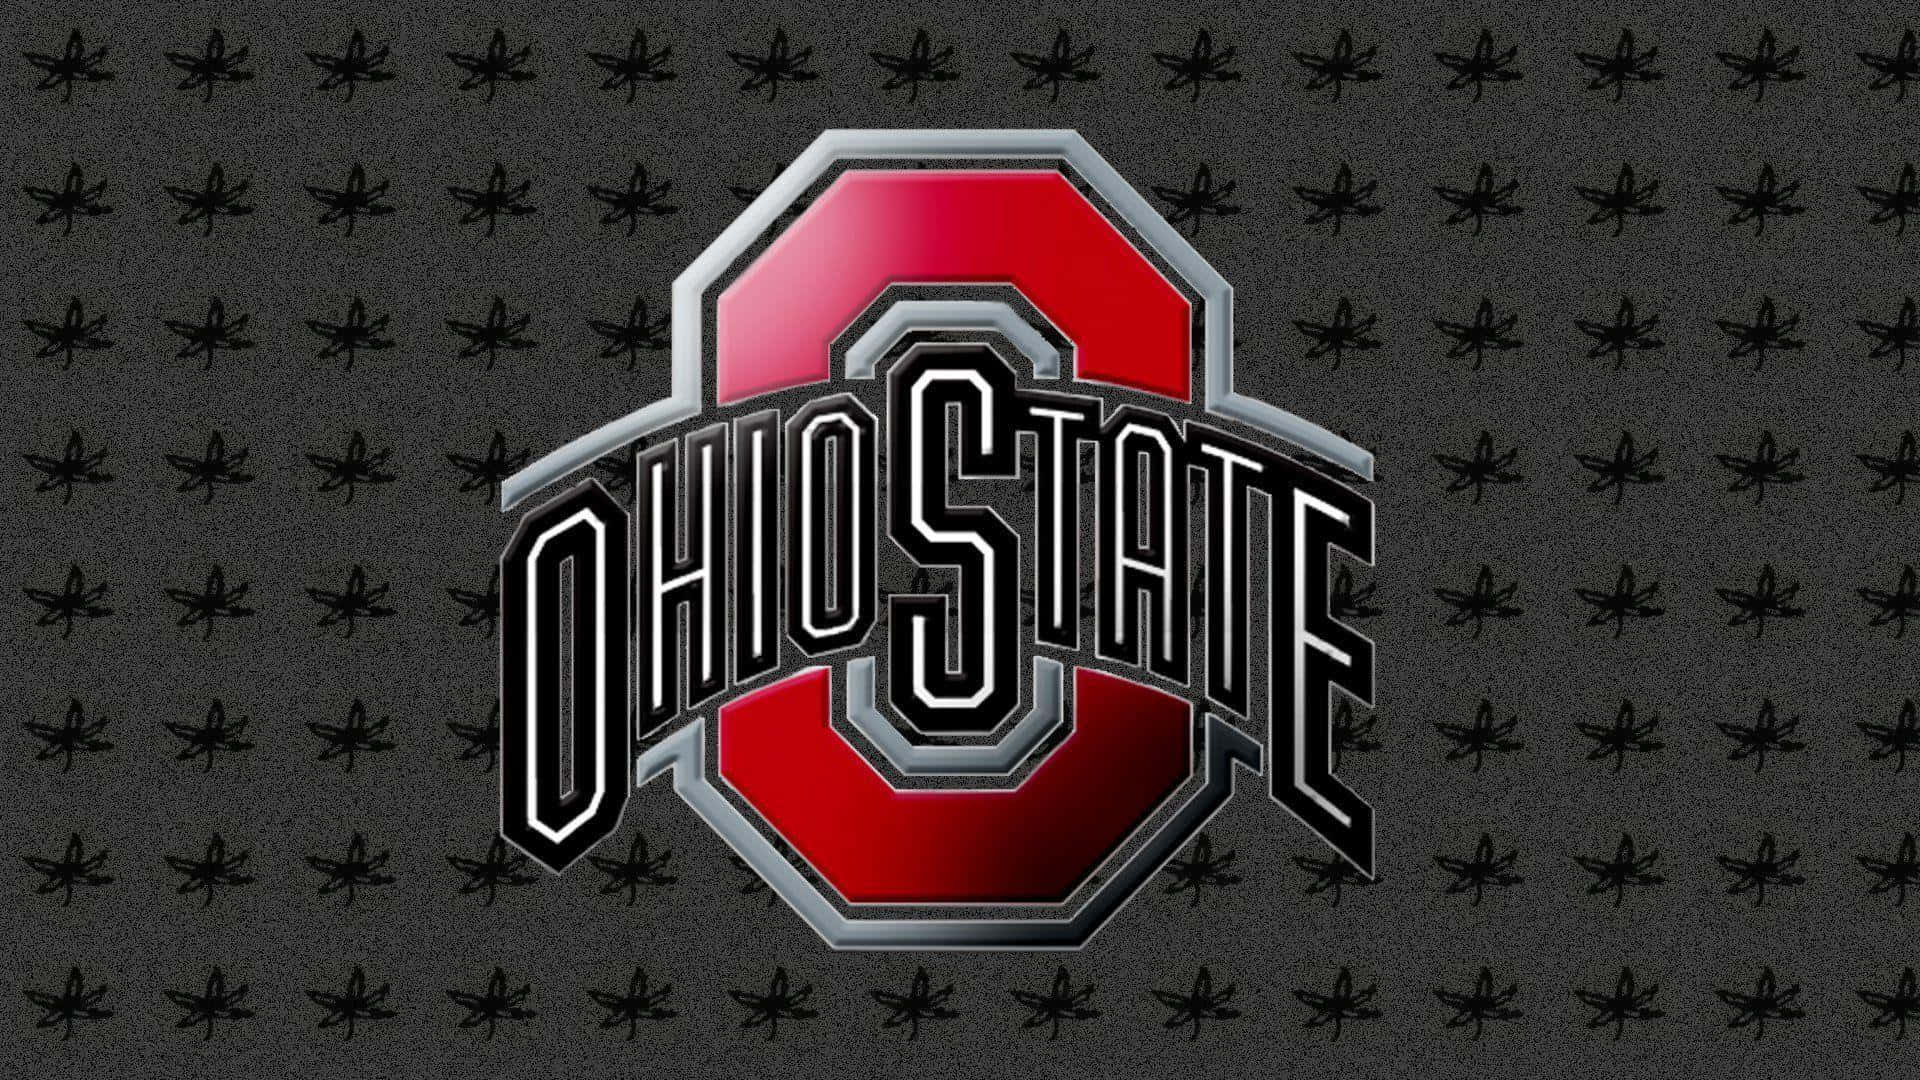 Charging on to victory, Ohio State Football takes over the game! Wallpaper